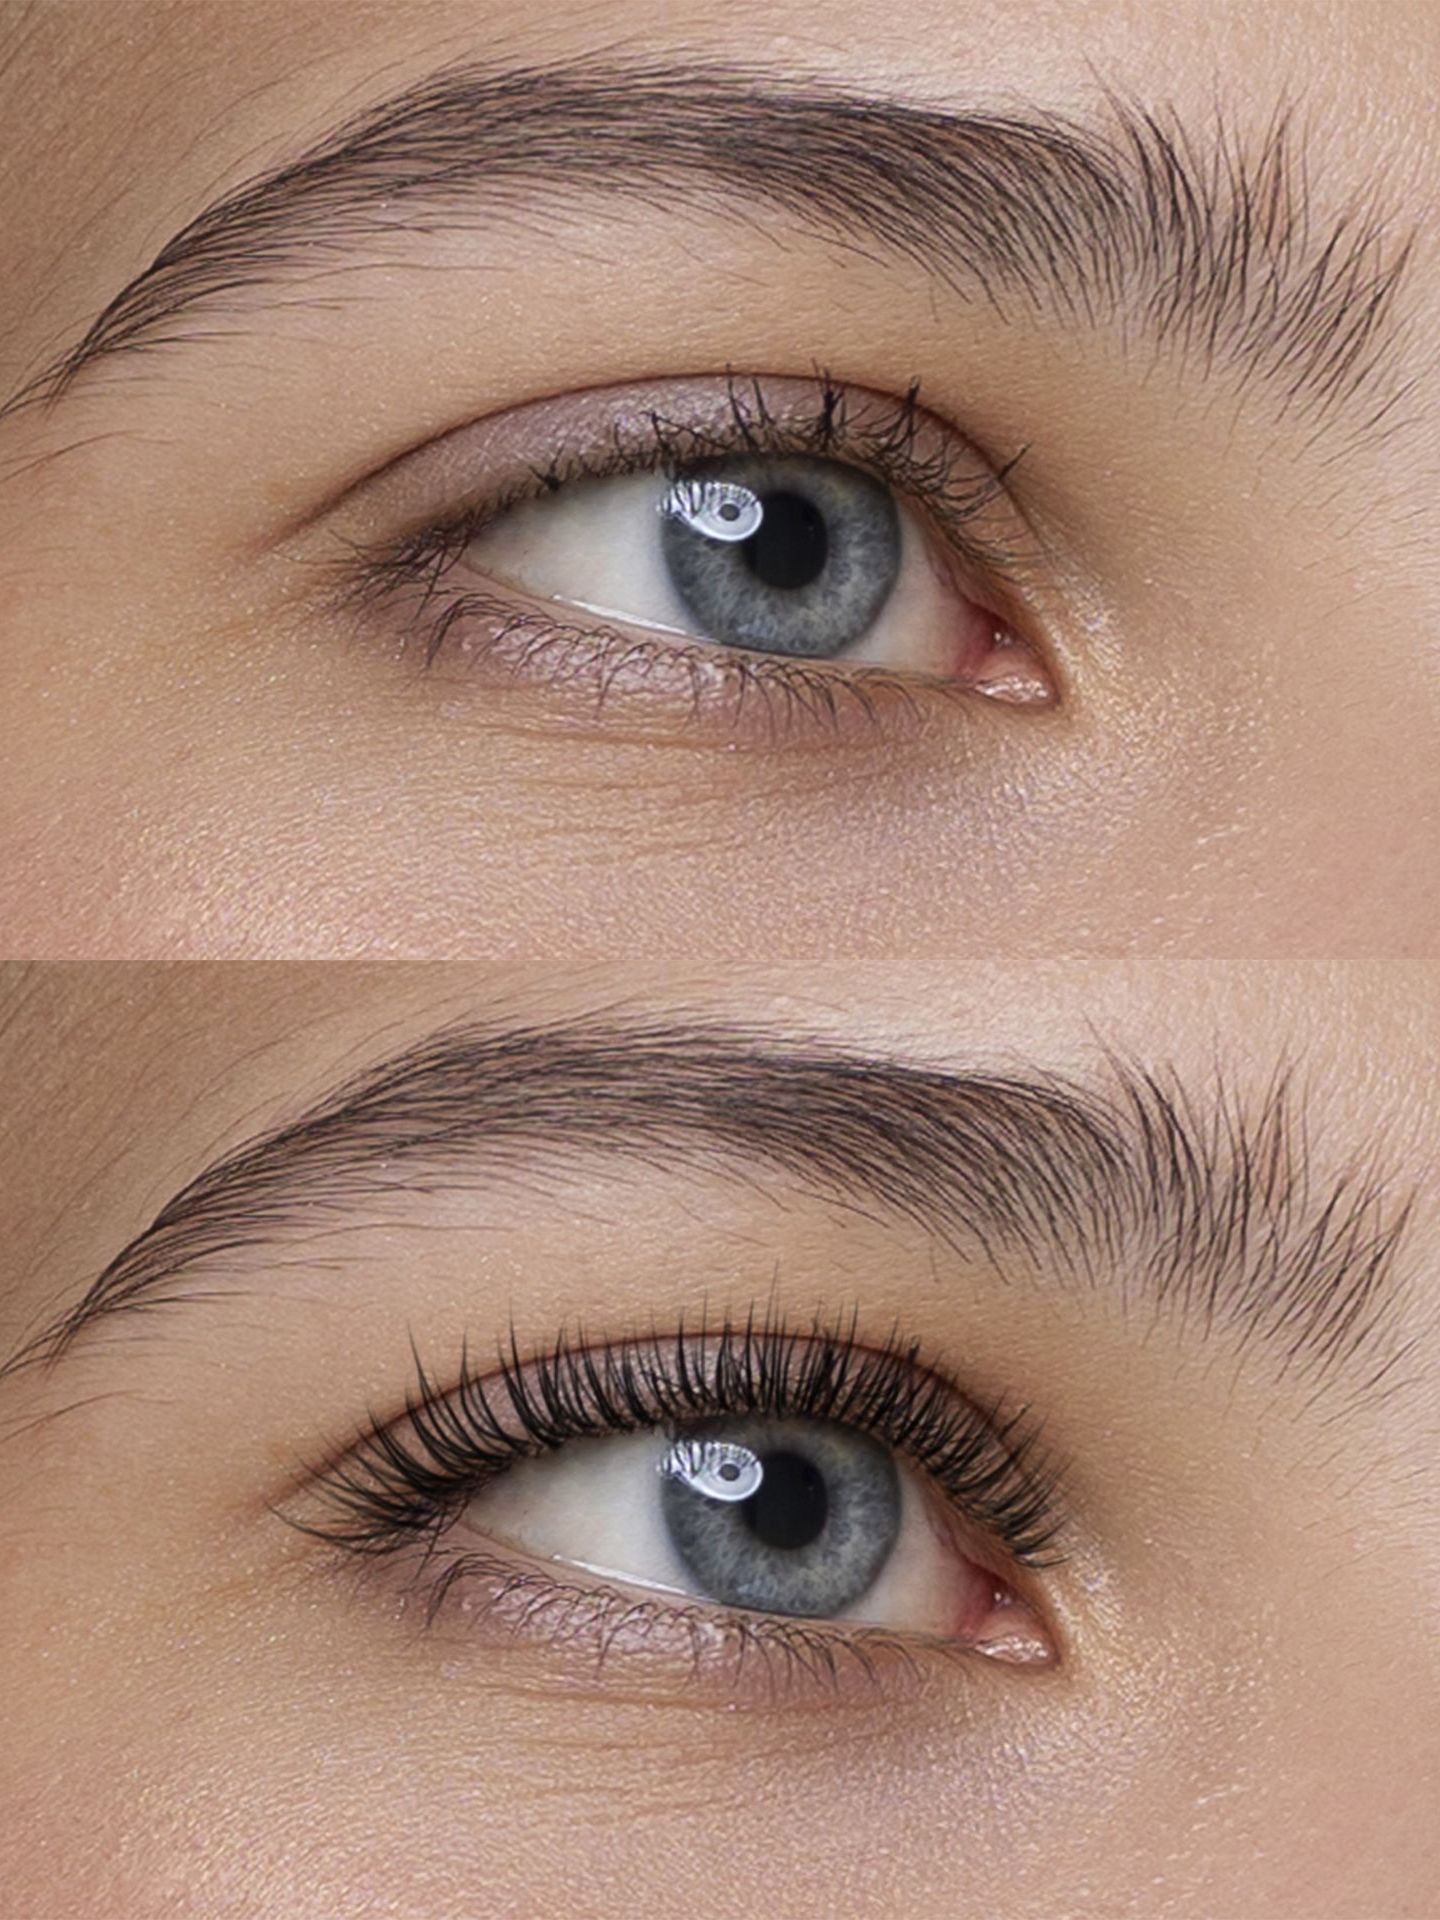 a before and after photo of a woman 's eye